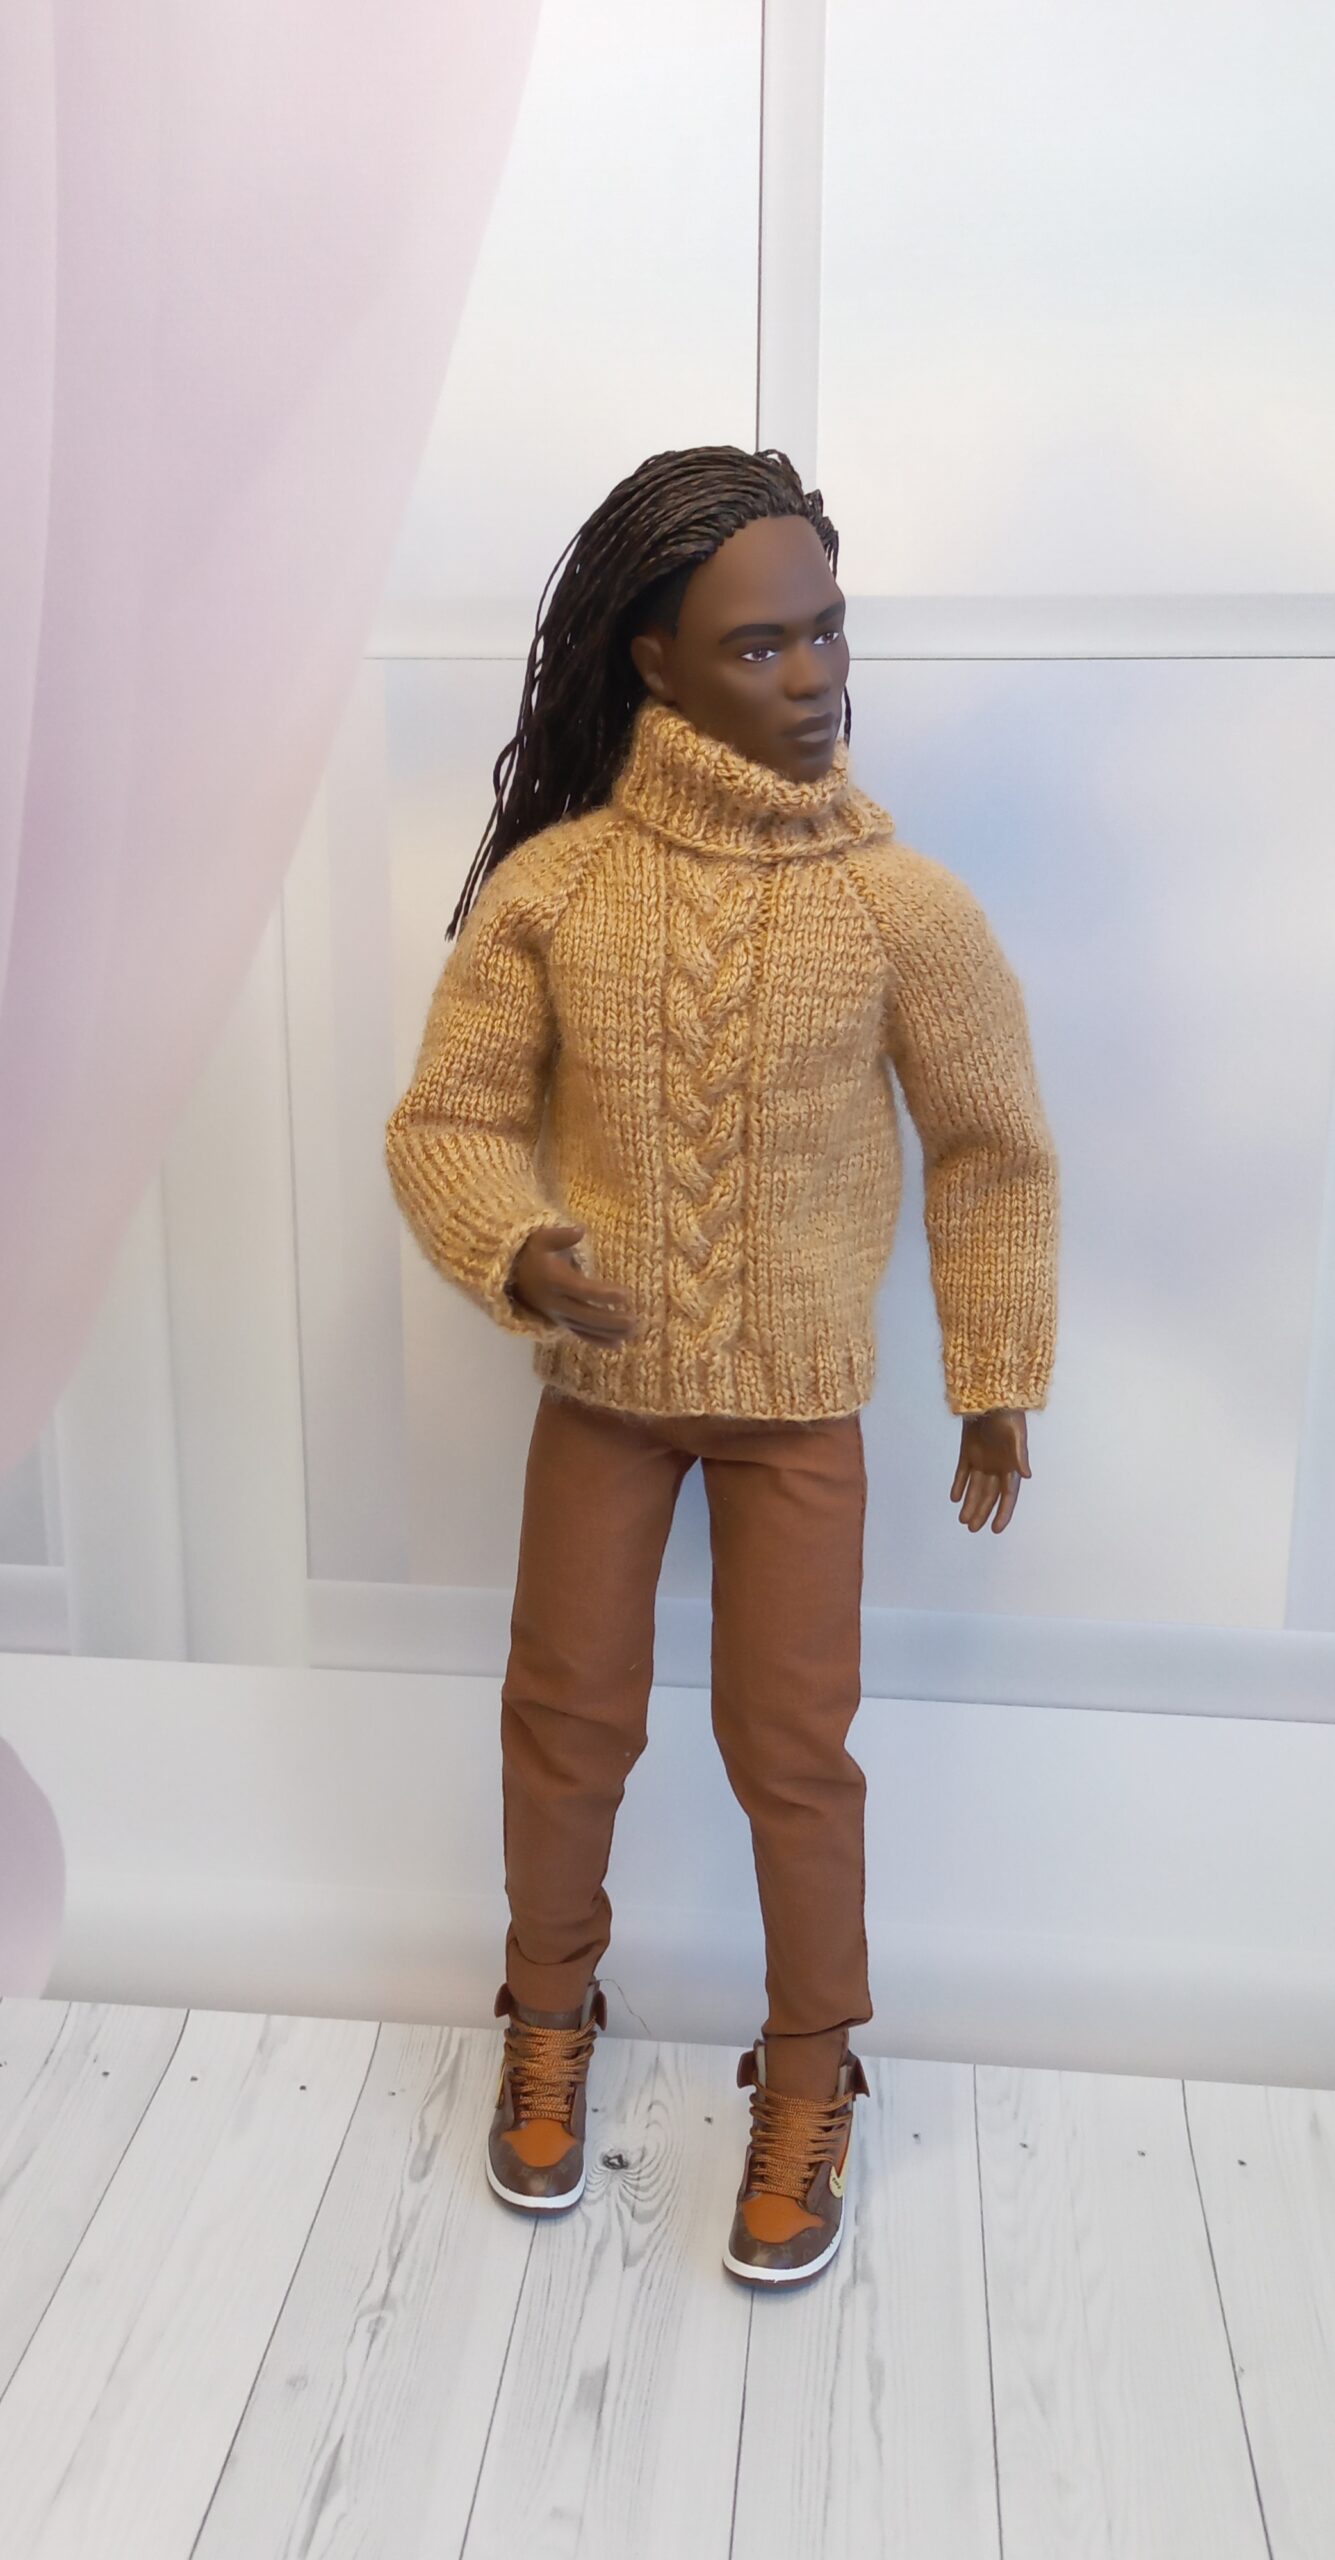 Ken doll clothes  Custom sweater 24 colors